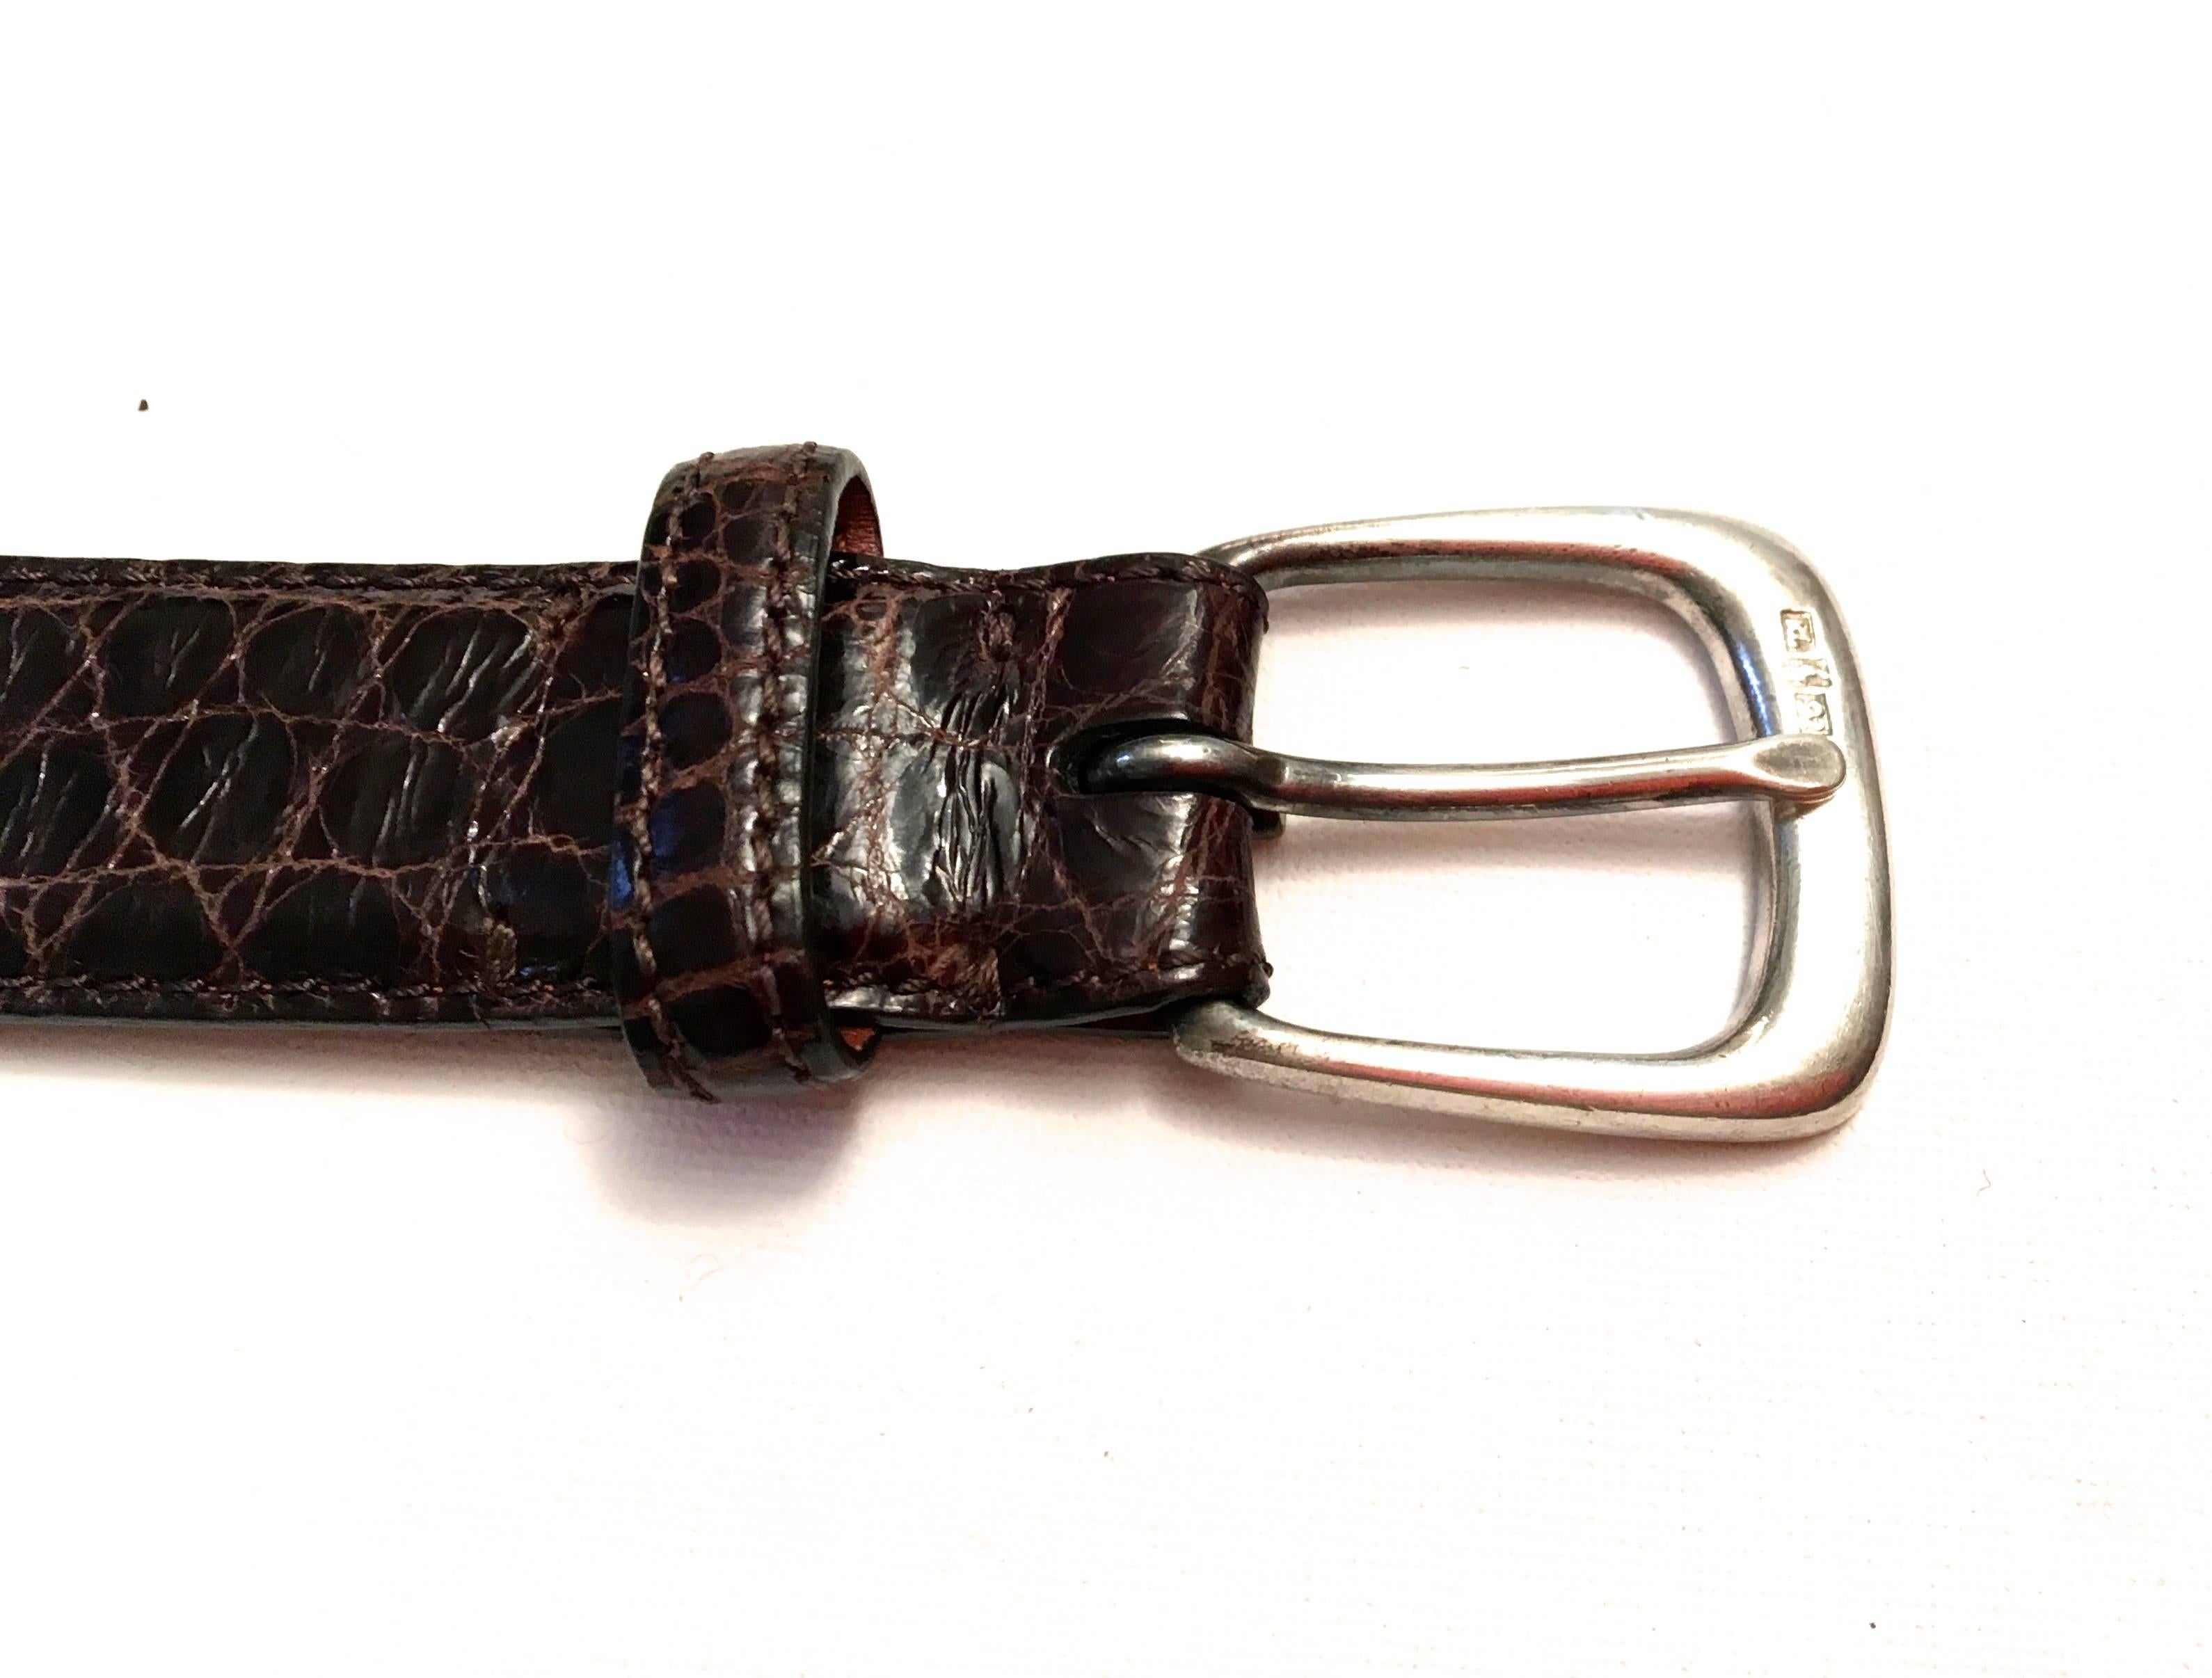 Presented here is a beautiful belt from Ralph Lauren. The belt is made from dark brown alligator and has a gorgeously crafted sterling silver buckle. The belt is 44 inches long and 1.2 inches wide. The buckle is 1.5 inches long and 1.5 inches wide.